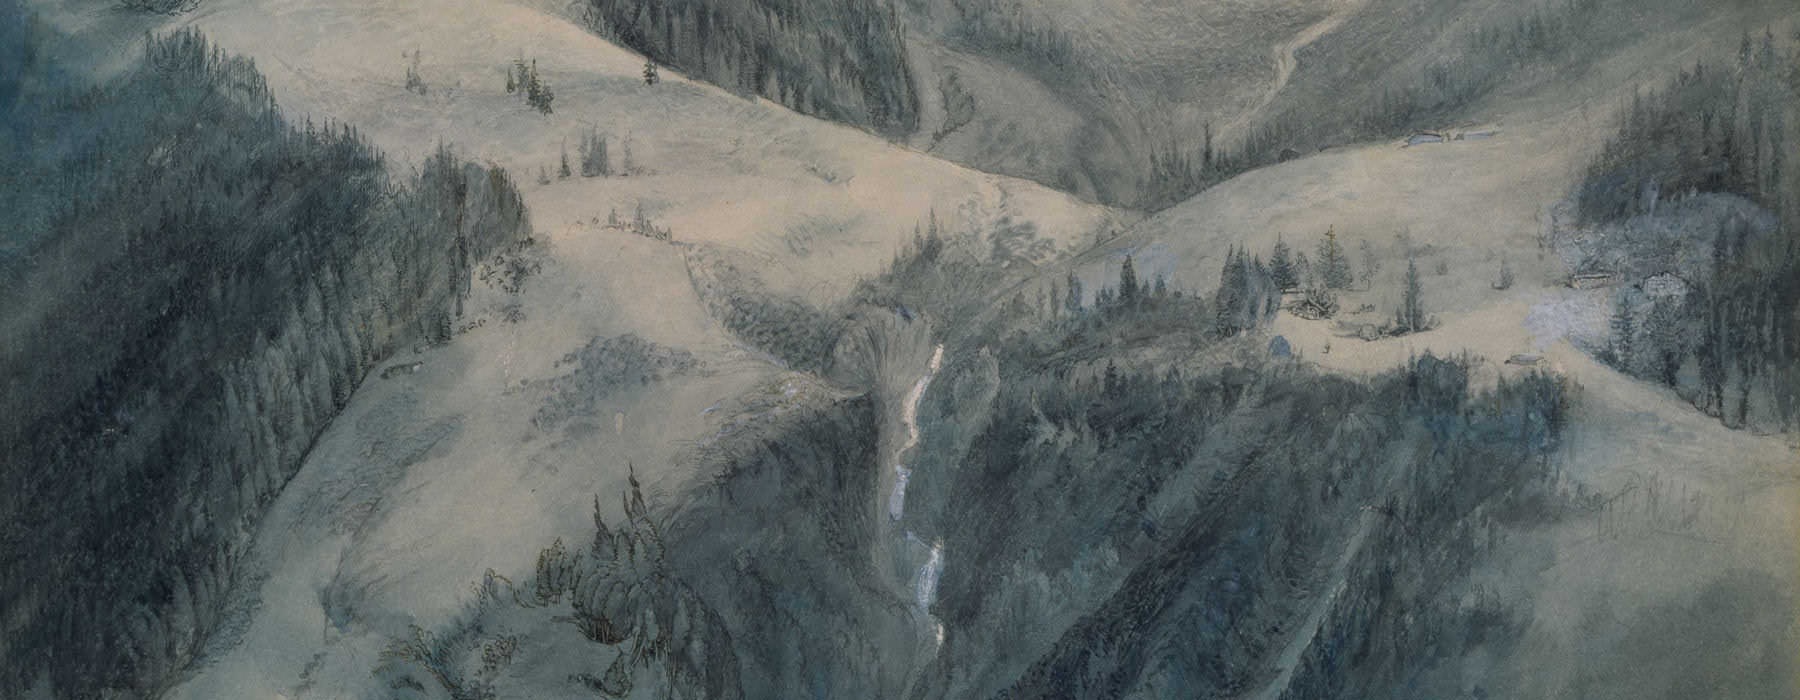 painting of snow covered mountain slopes with trees and river